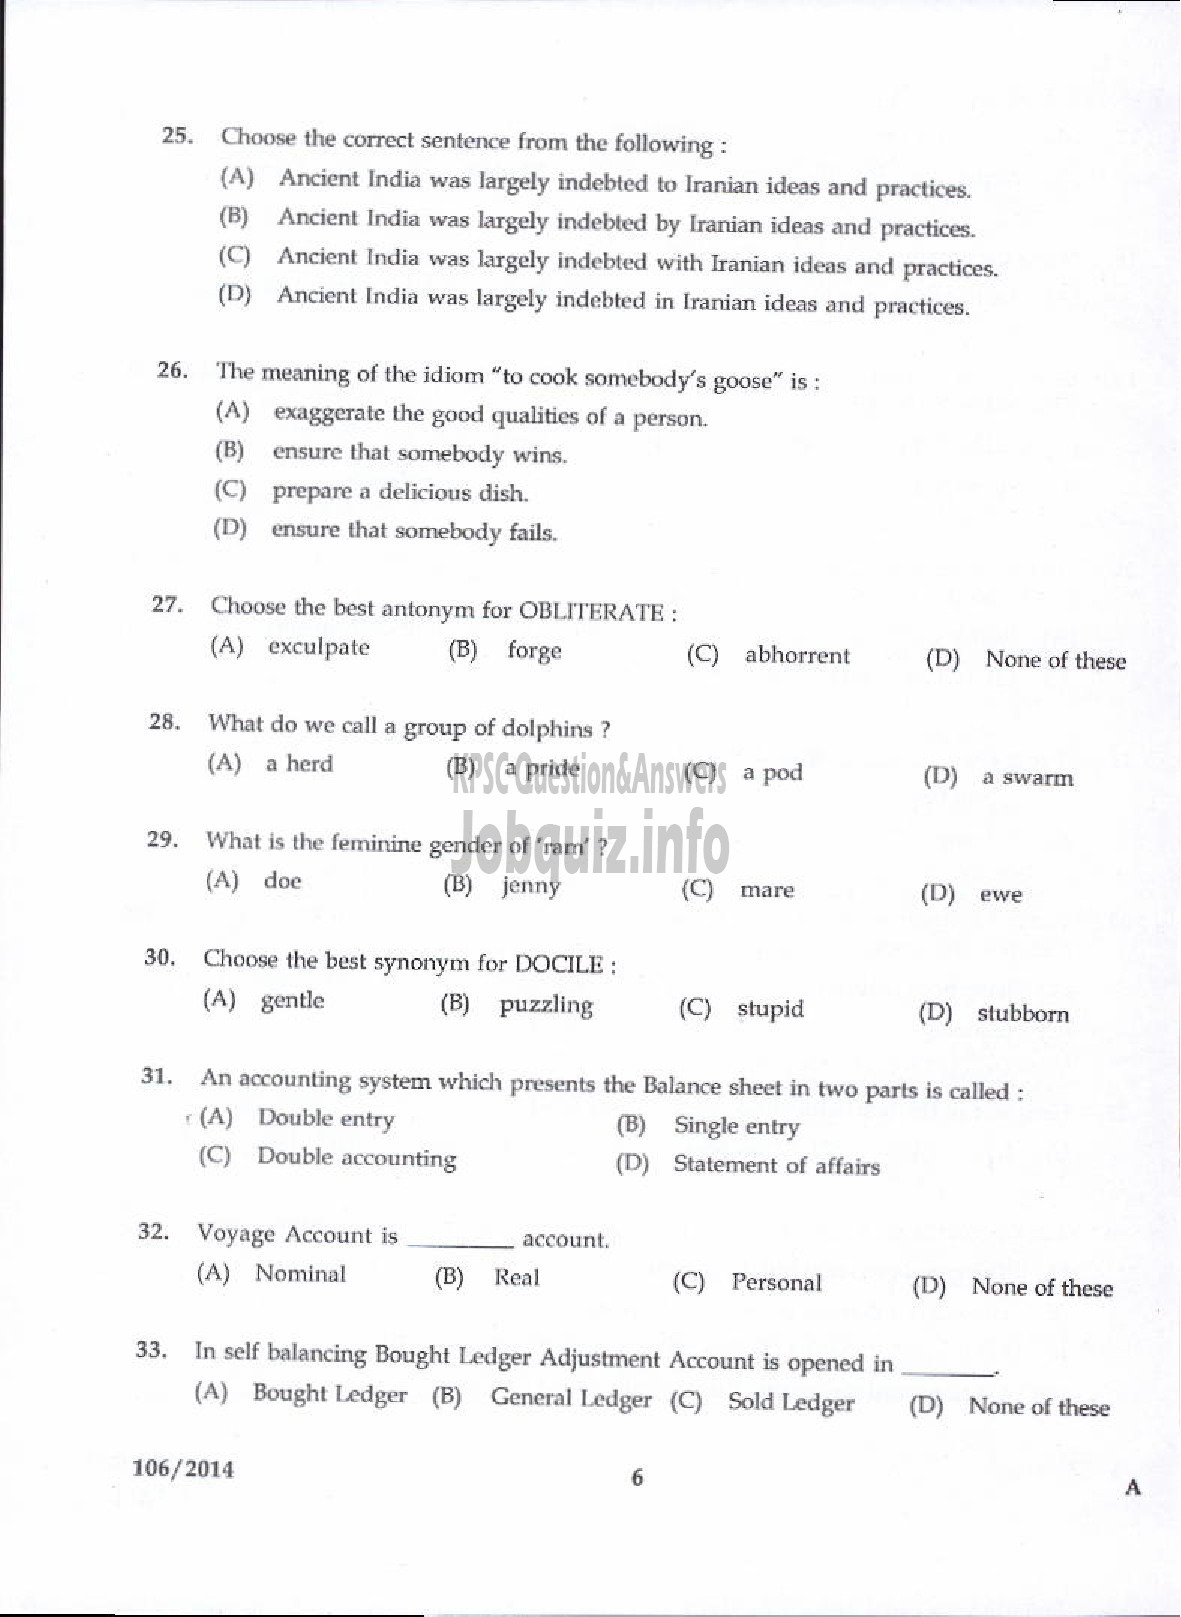 Kerala PSC Question Paper - DIVISIONAL ACCOUNTANT KERALA WATER AUTHORITY PRELIMINARY TEST-4